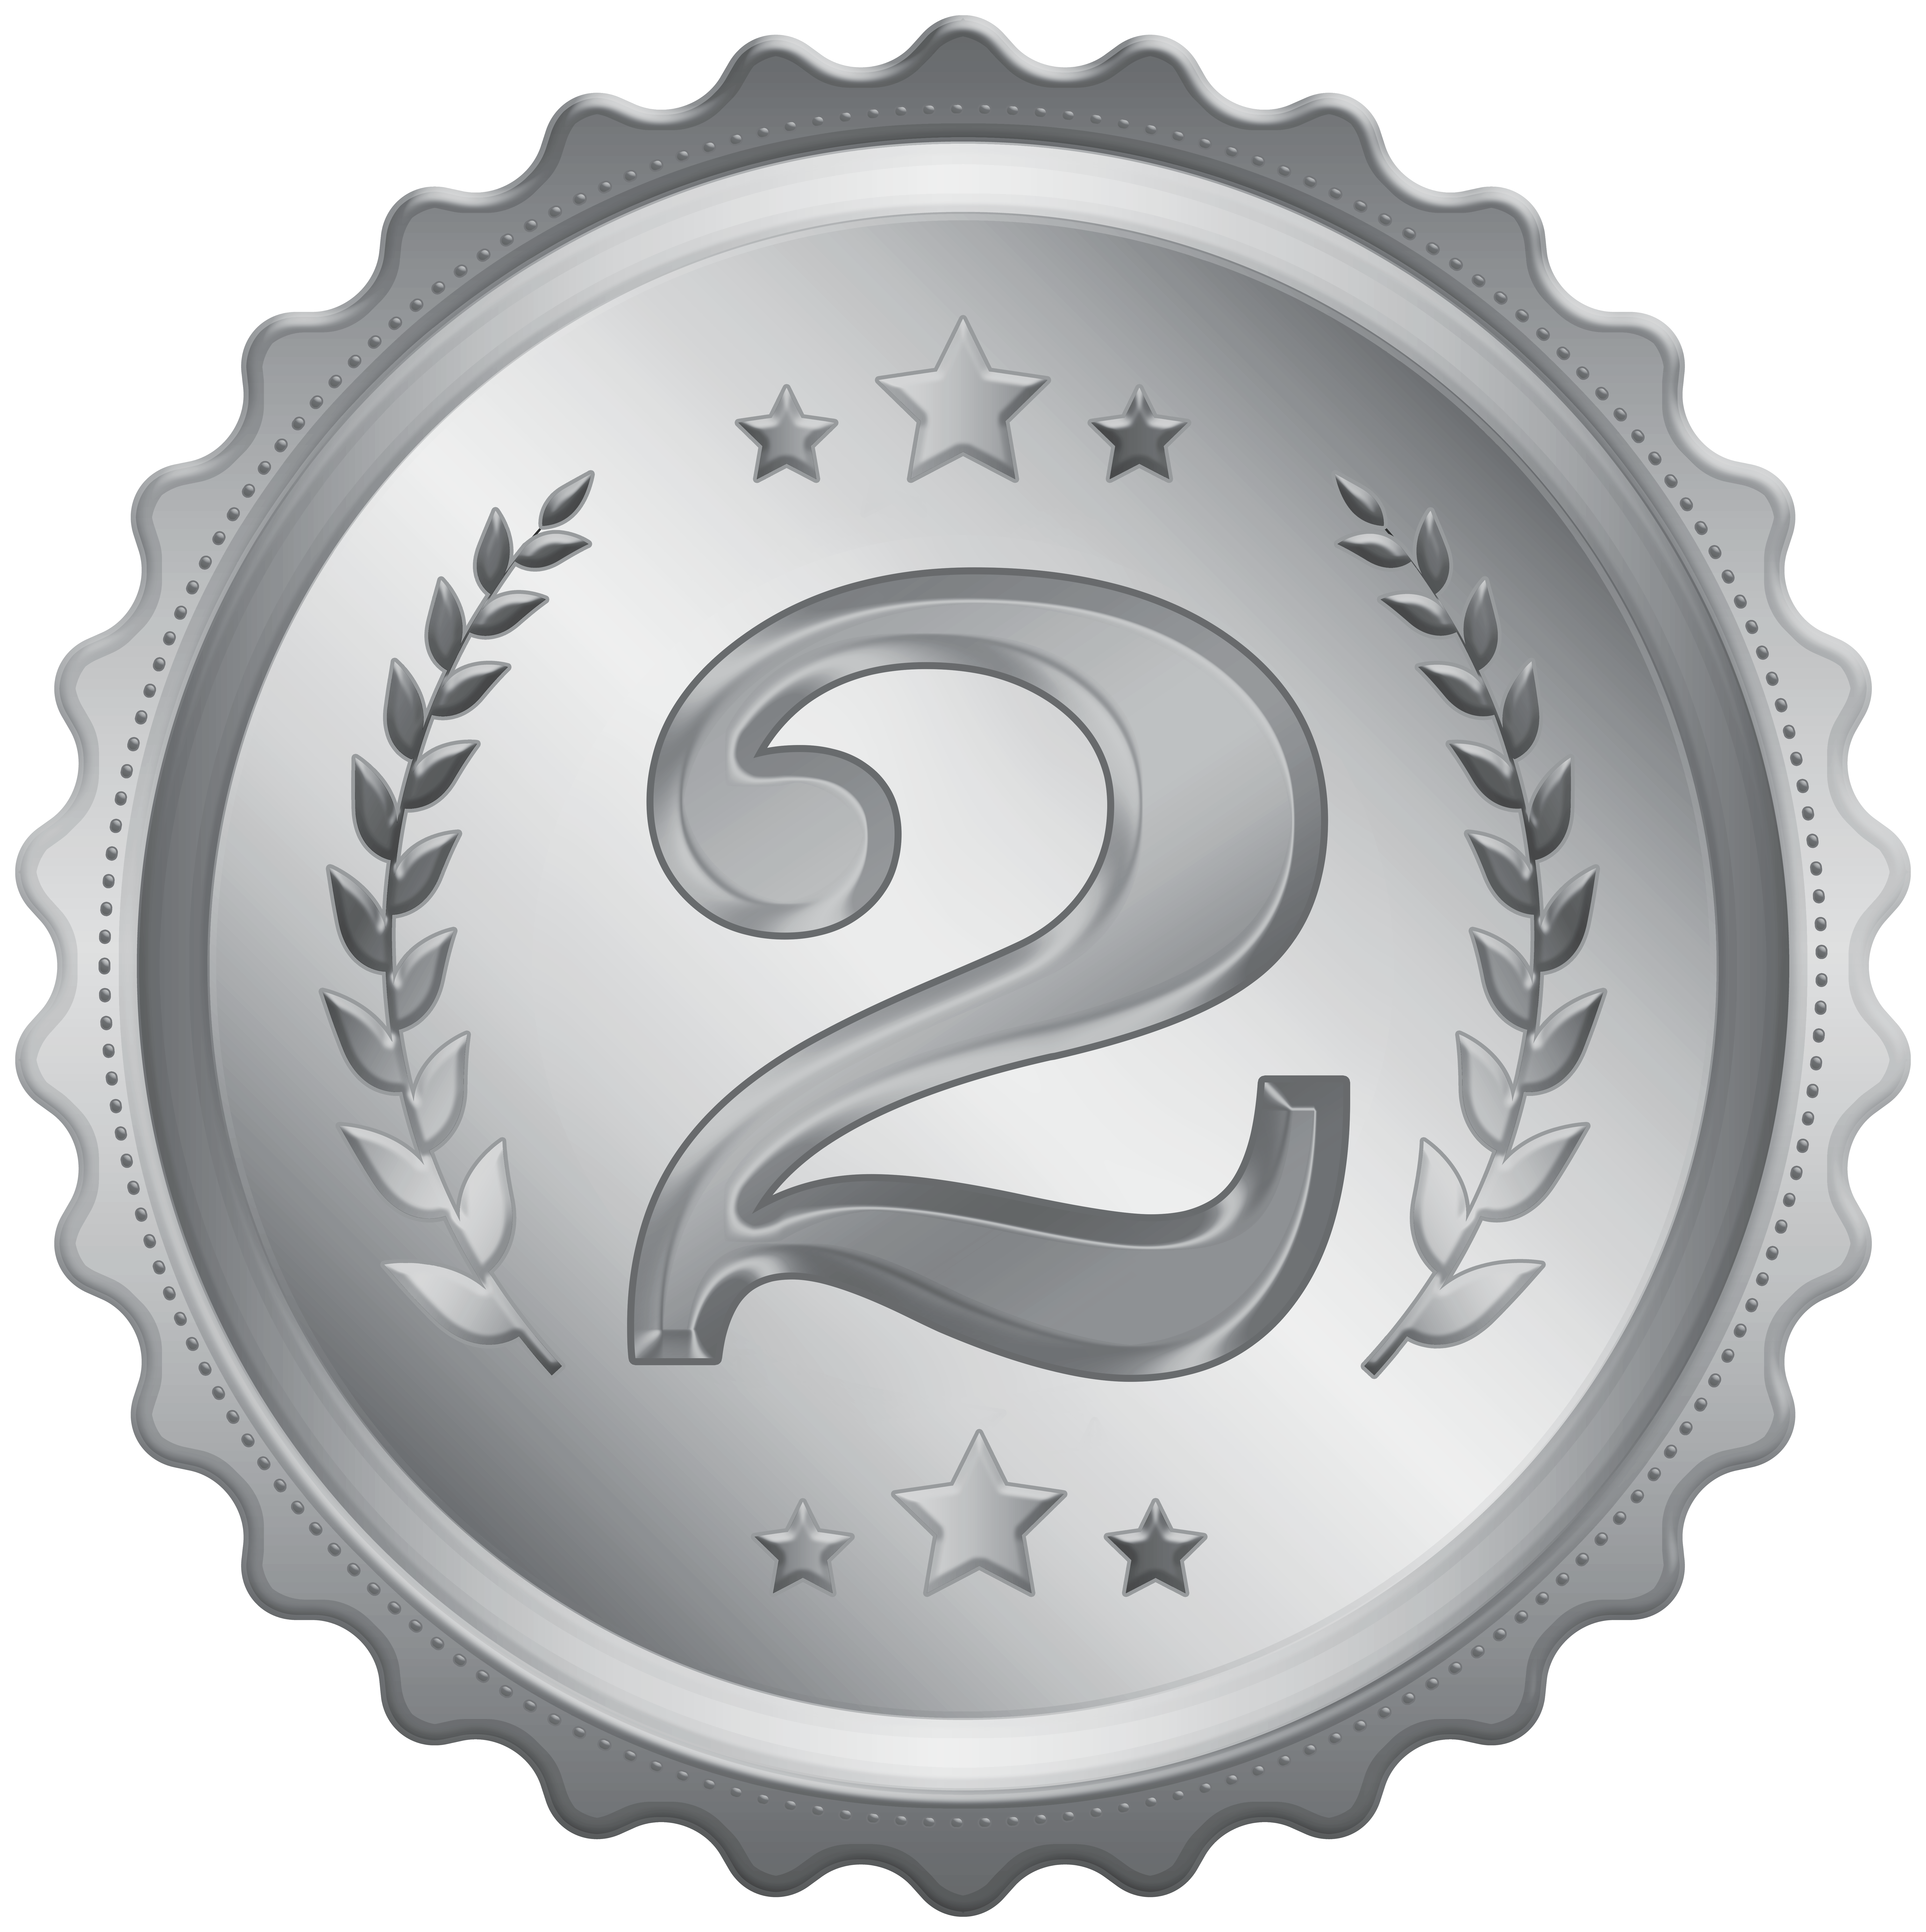 Second Place Medal Badge Clipart Image Gallery Yopriceville High Quality Images And Transparent Png Free Clipart